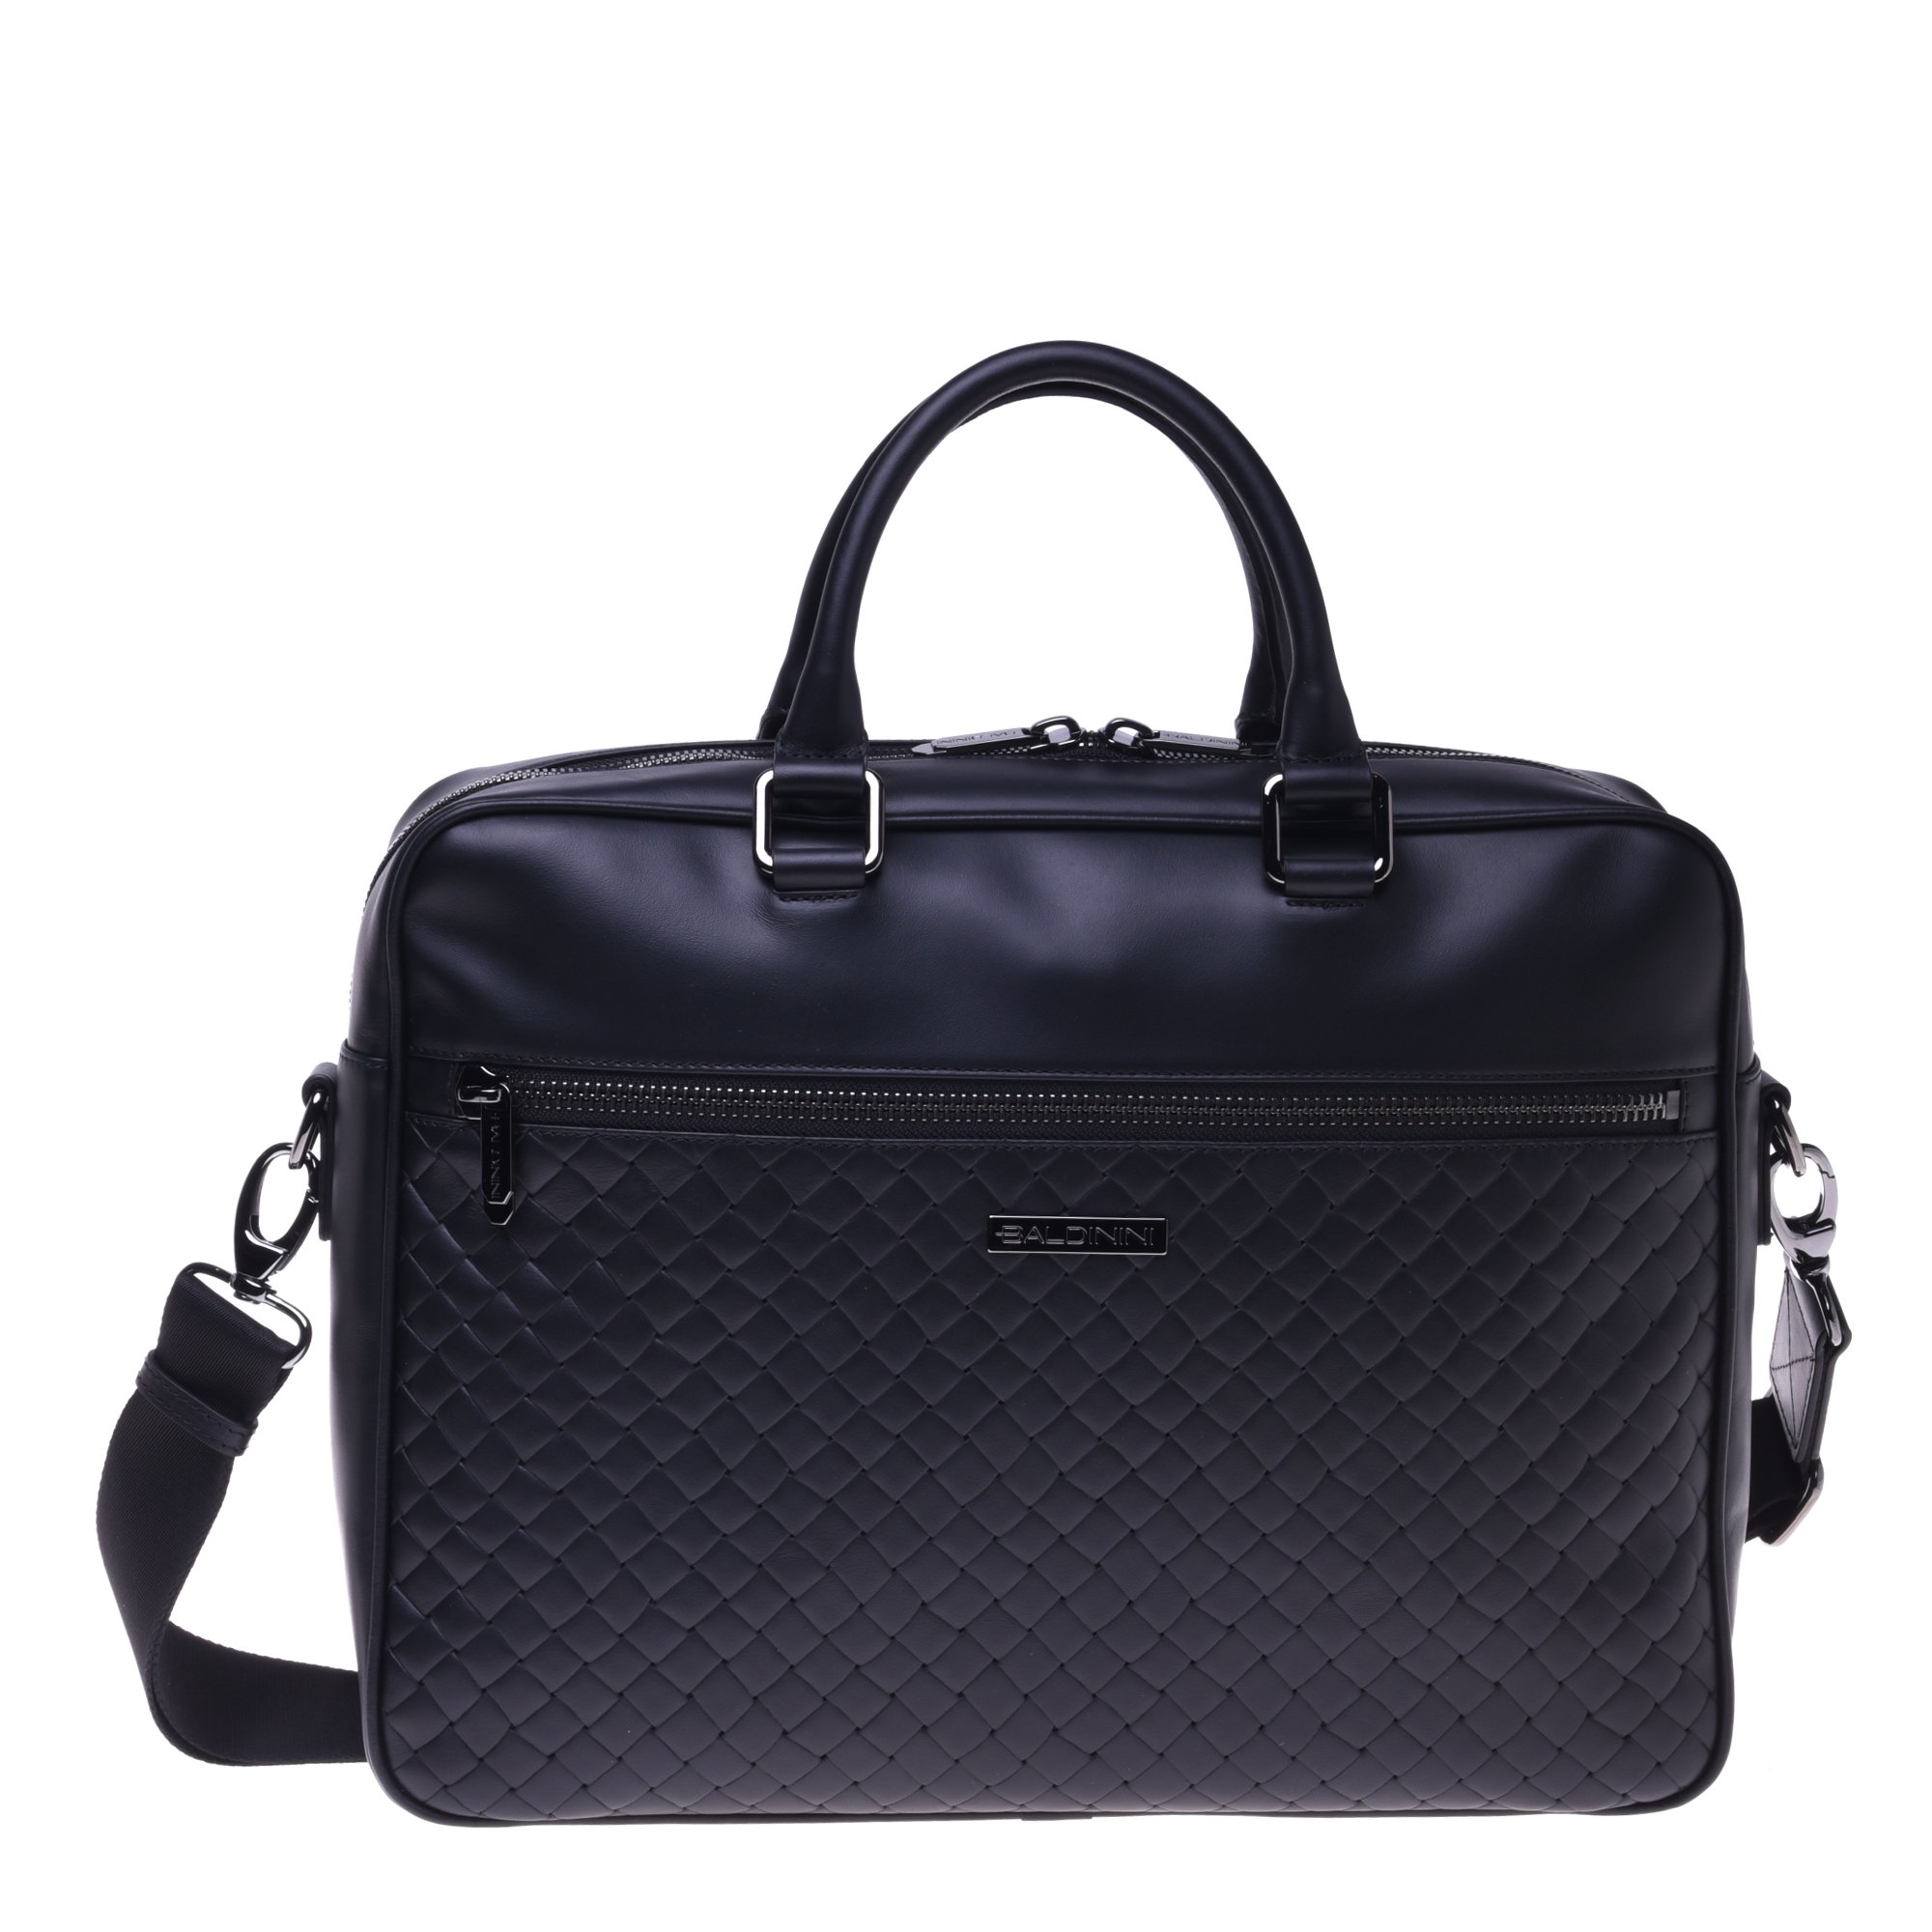 Professional bag in black woven leather image